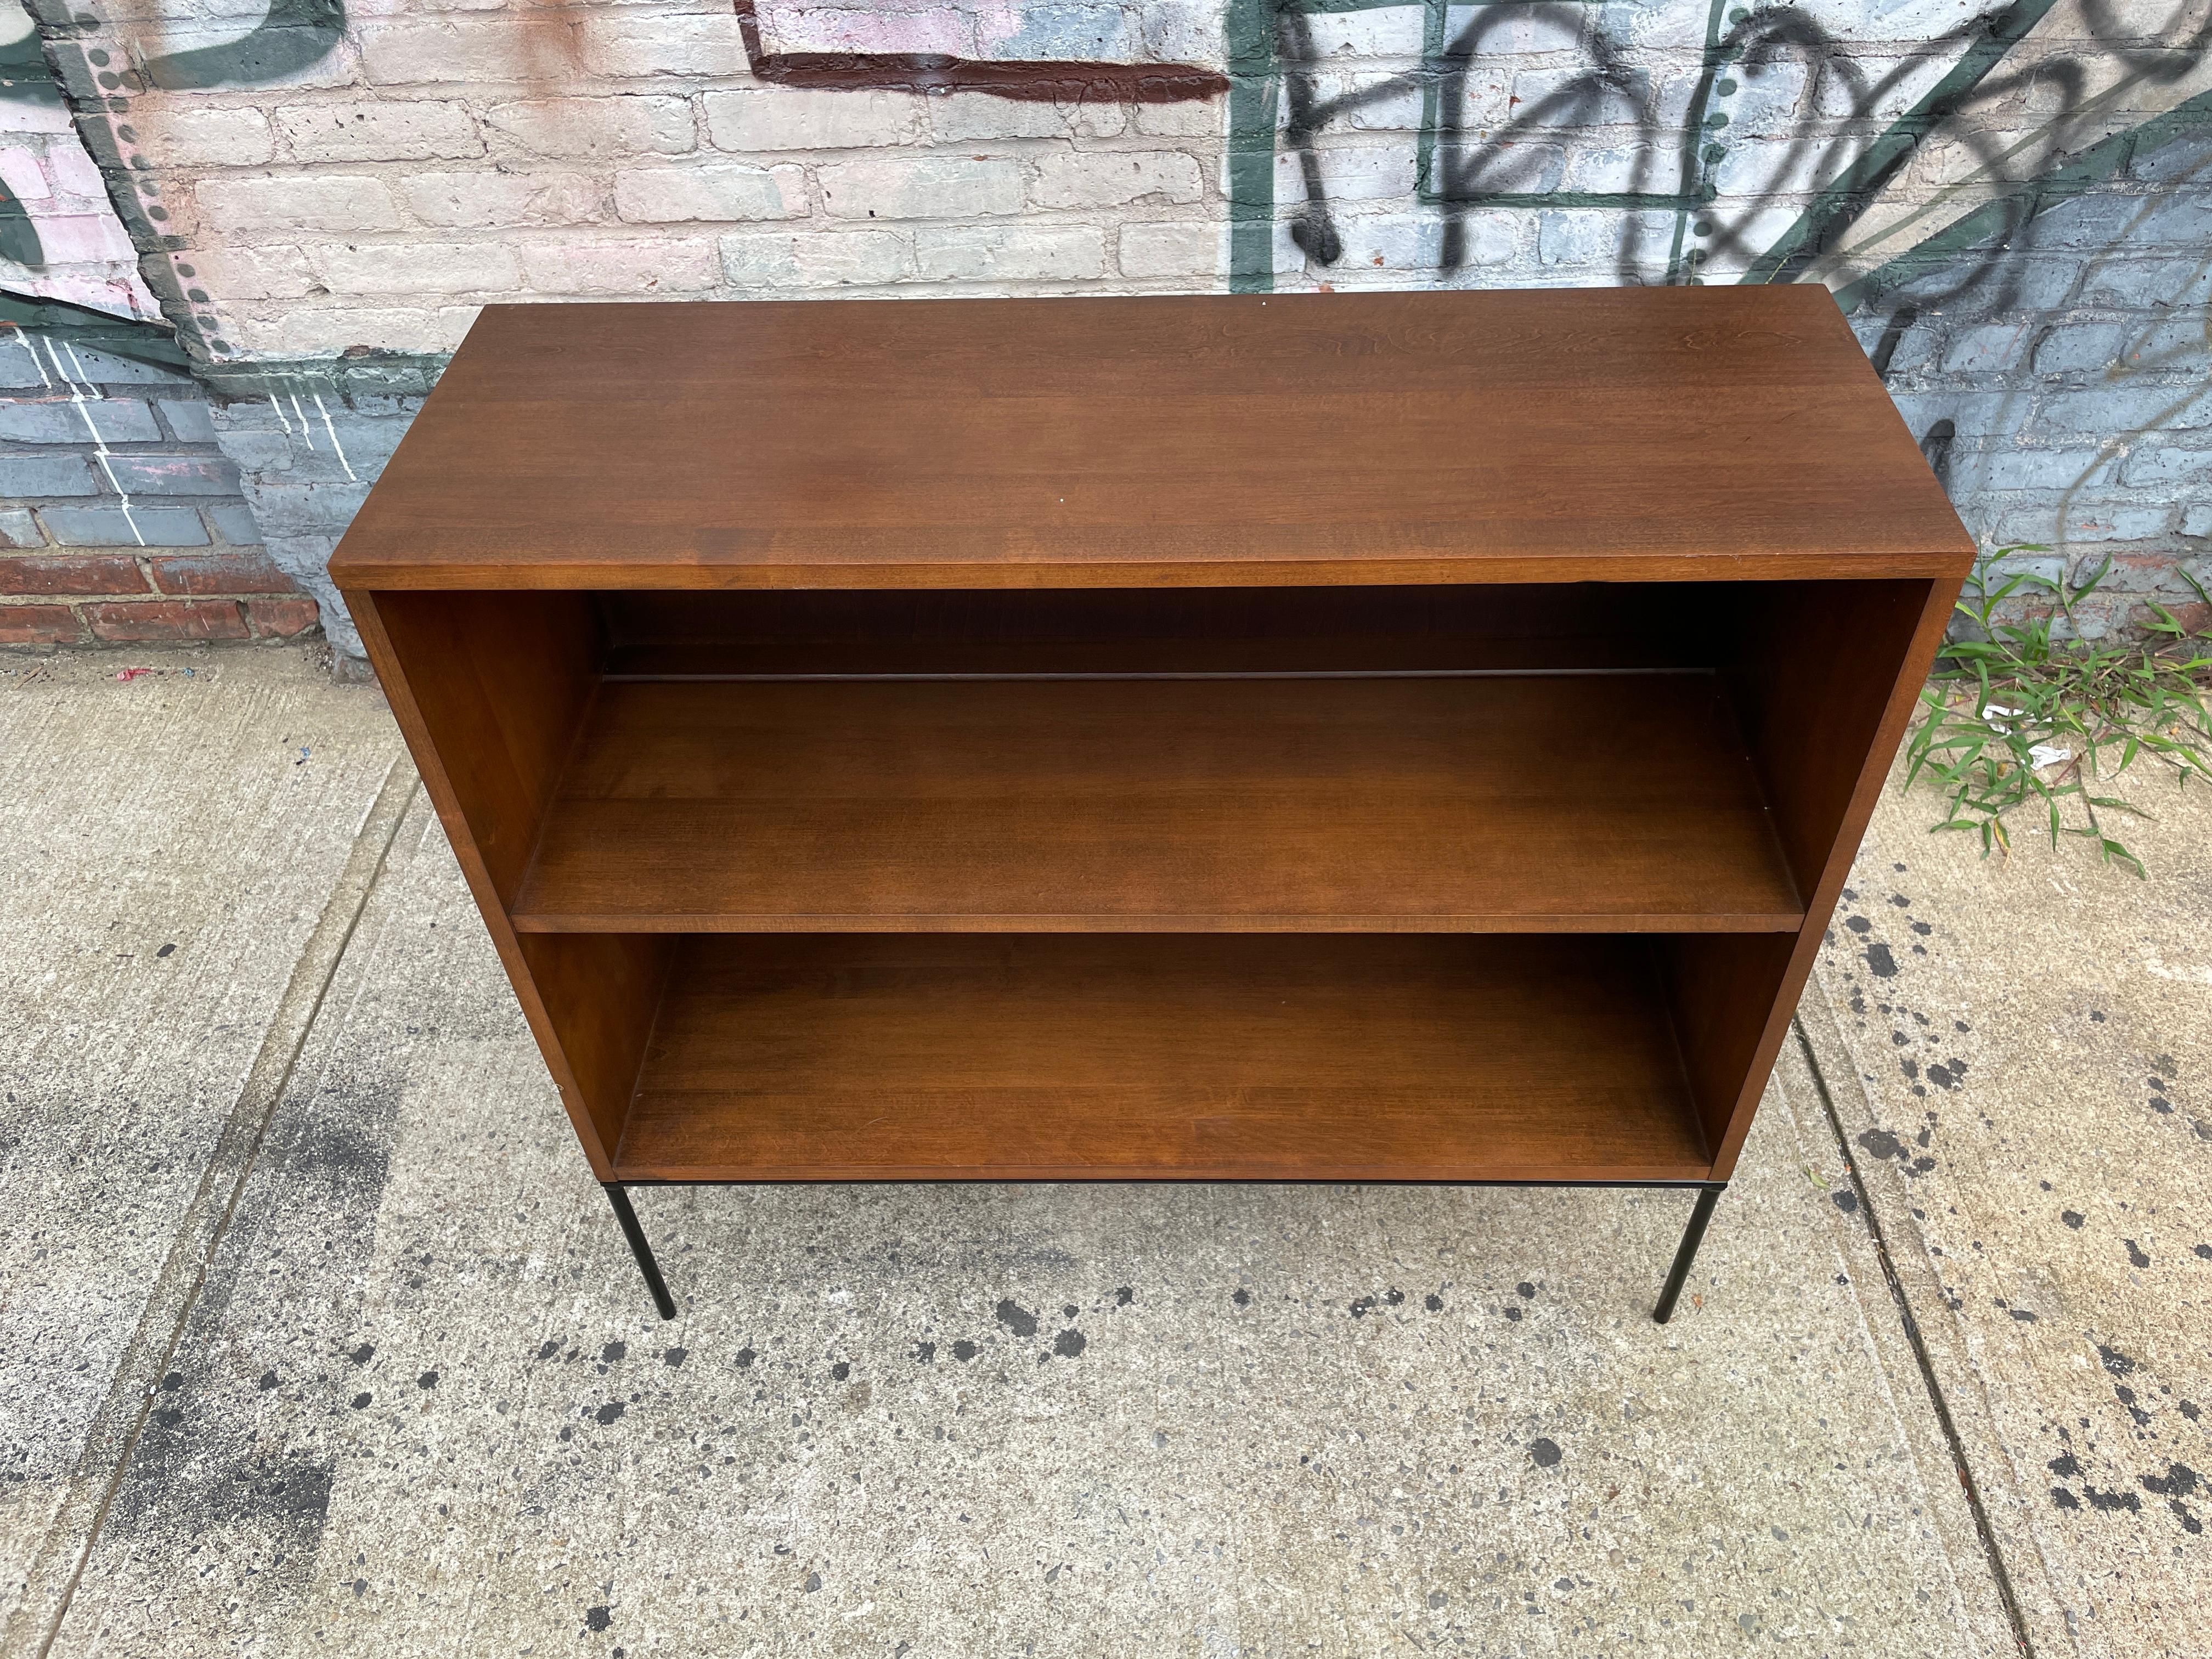 Vintage midcentury Paul McCobb single bookcase #1516 solid maple with original walnut finish on an Iron base. Beautiful bookcase by Paul McCobb circa 1950s Planner Group, single center shelf fixed position, solid maple construction. Original backing